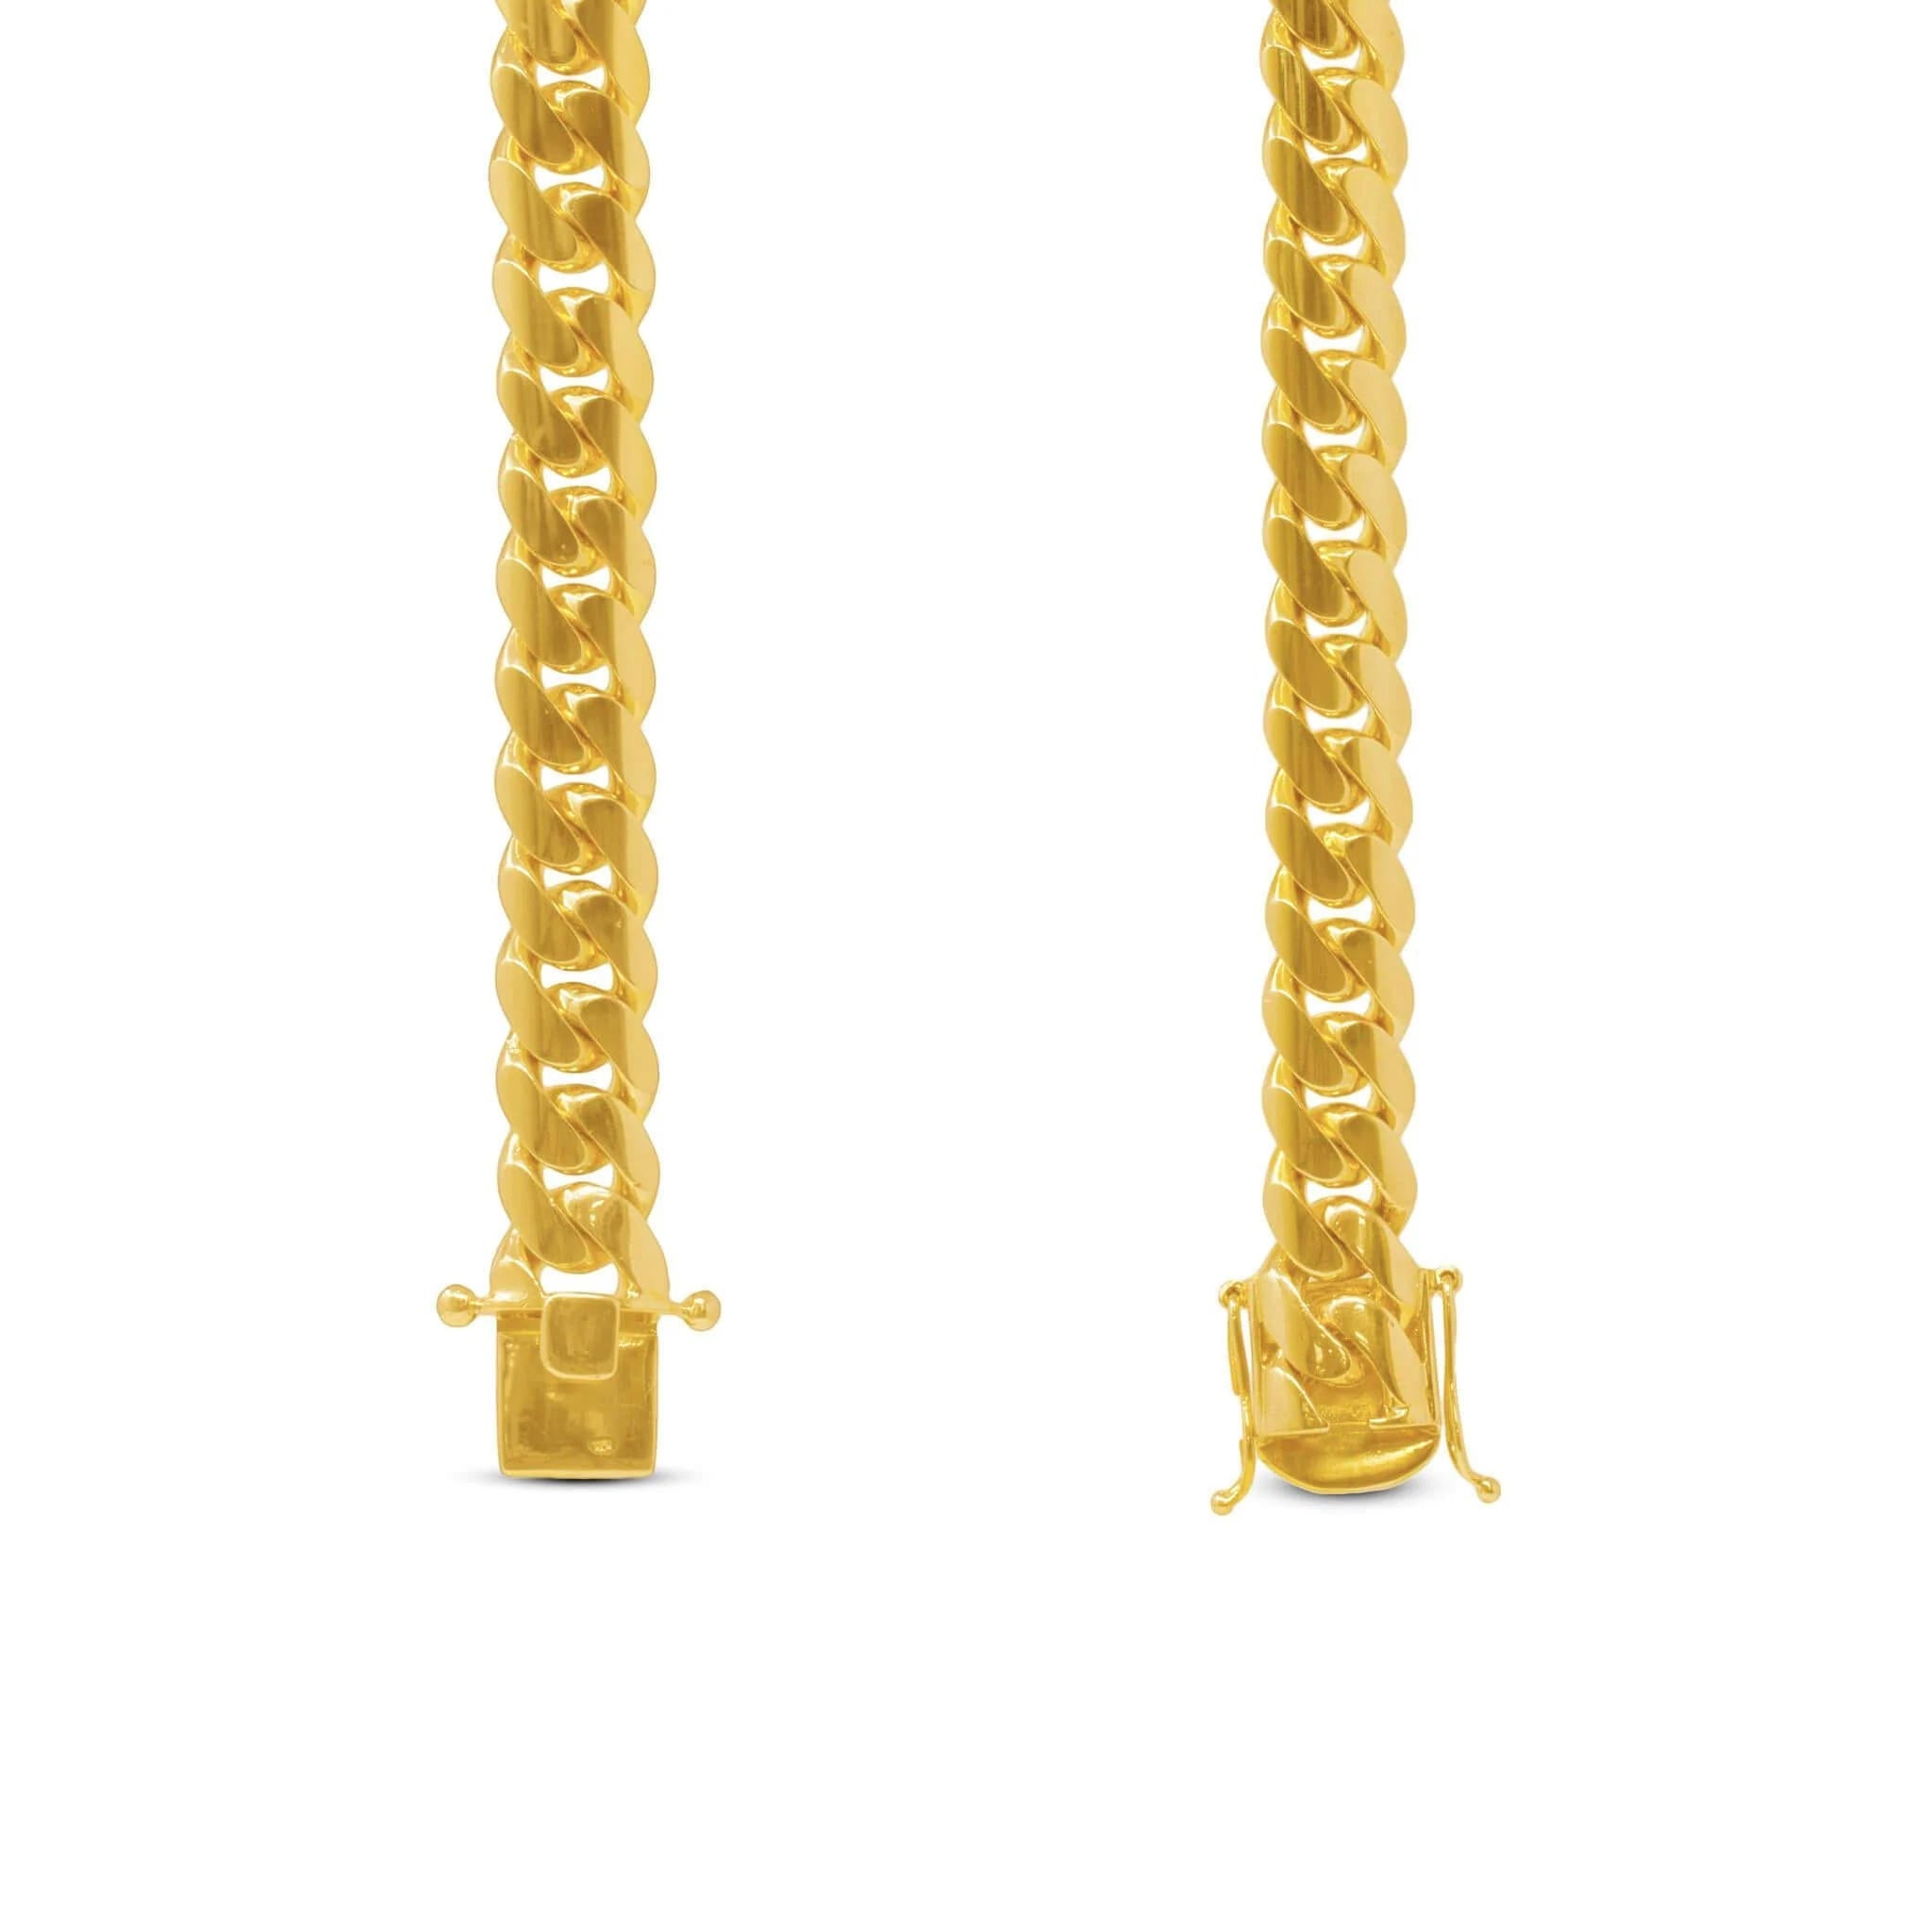 17mm Miami Cuban Link Bracelet in 14K Solid Yellow Gold